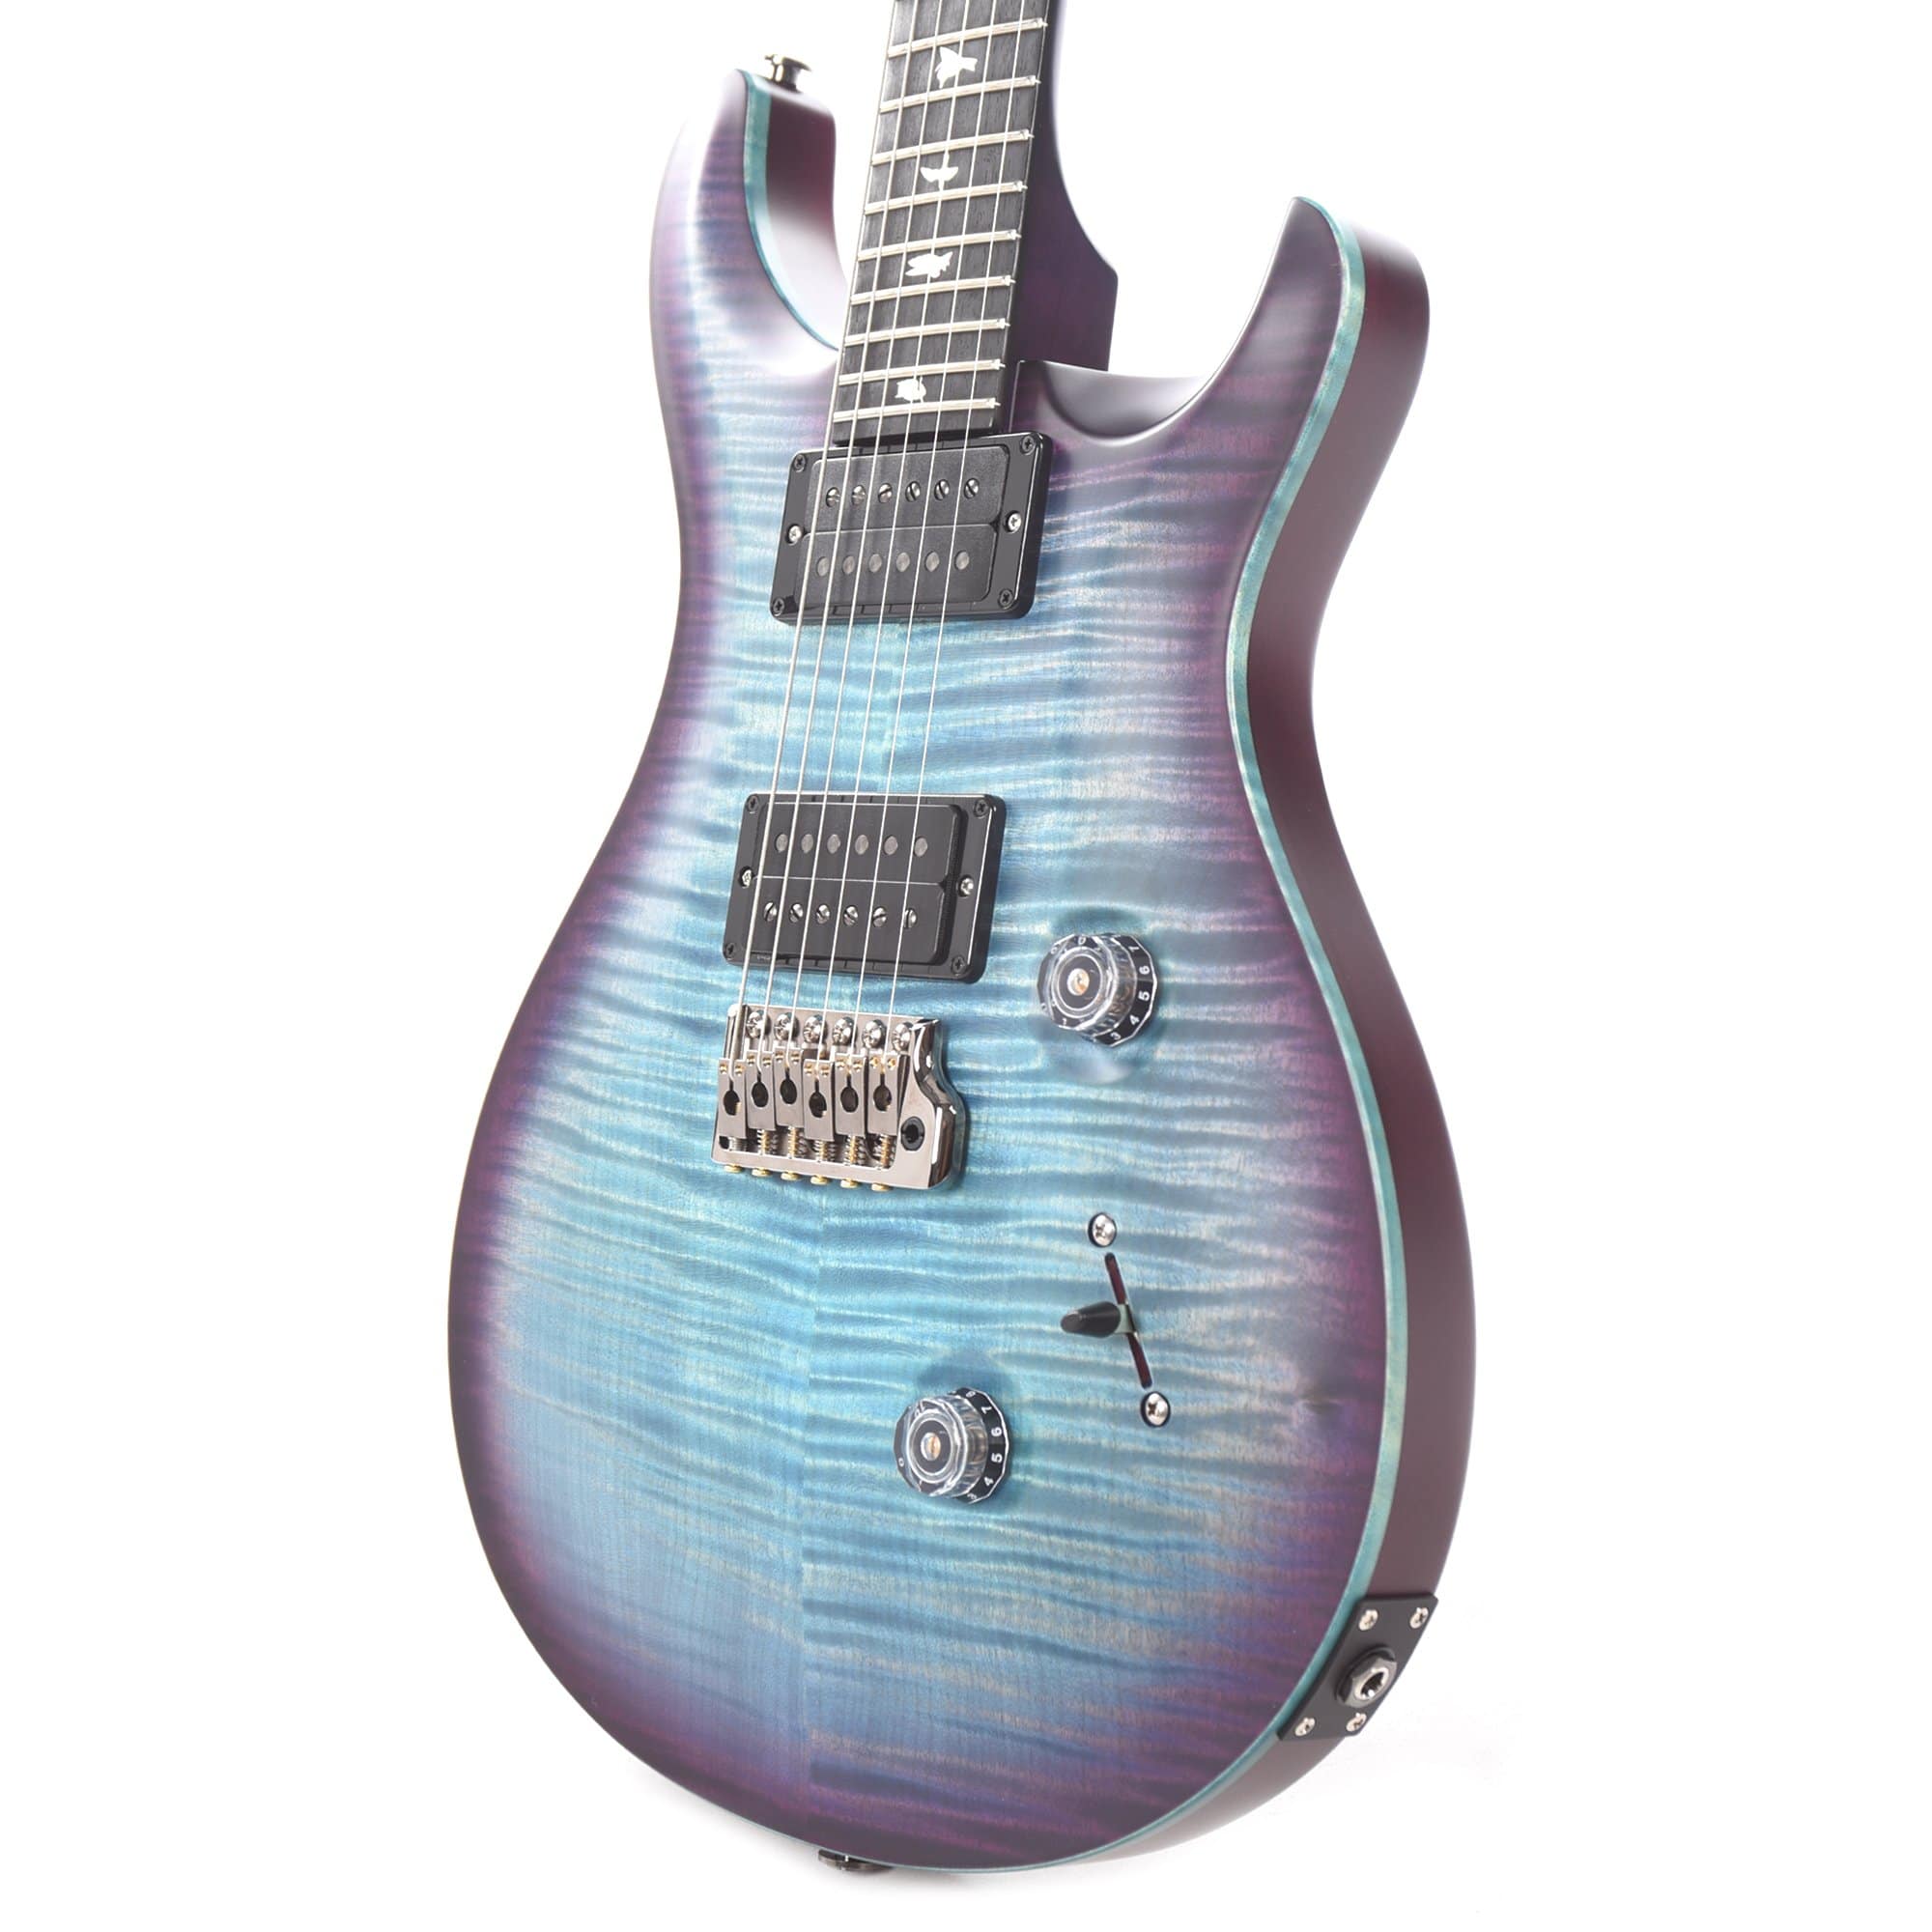 PRS Wood Library Custom 24 10 Top Flame Aquableux Purple Burst Satin w/Pattern Thin Stained Figured Maple Neck & Ebony Fingerboard Electric Guitars / Solid Body